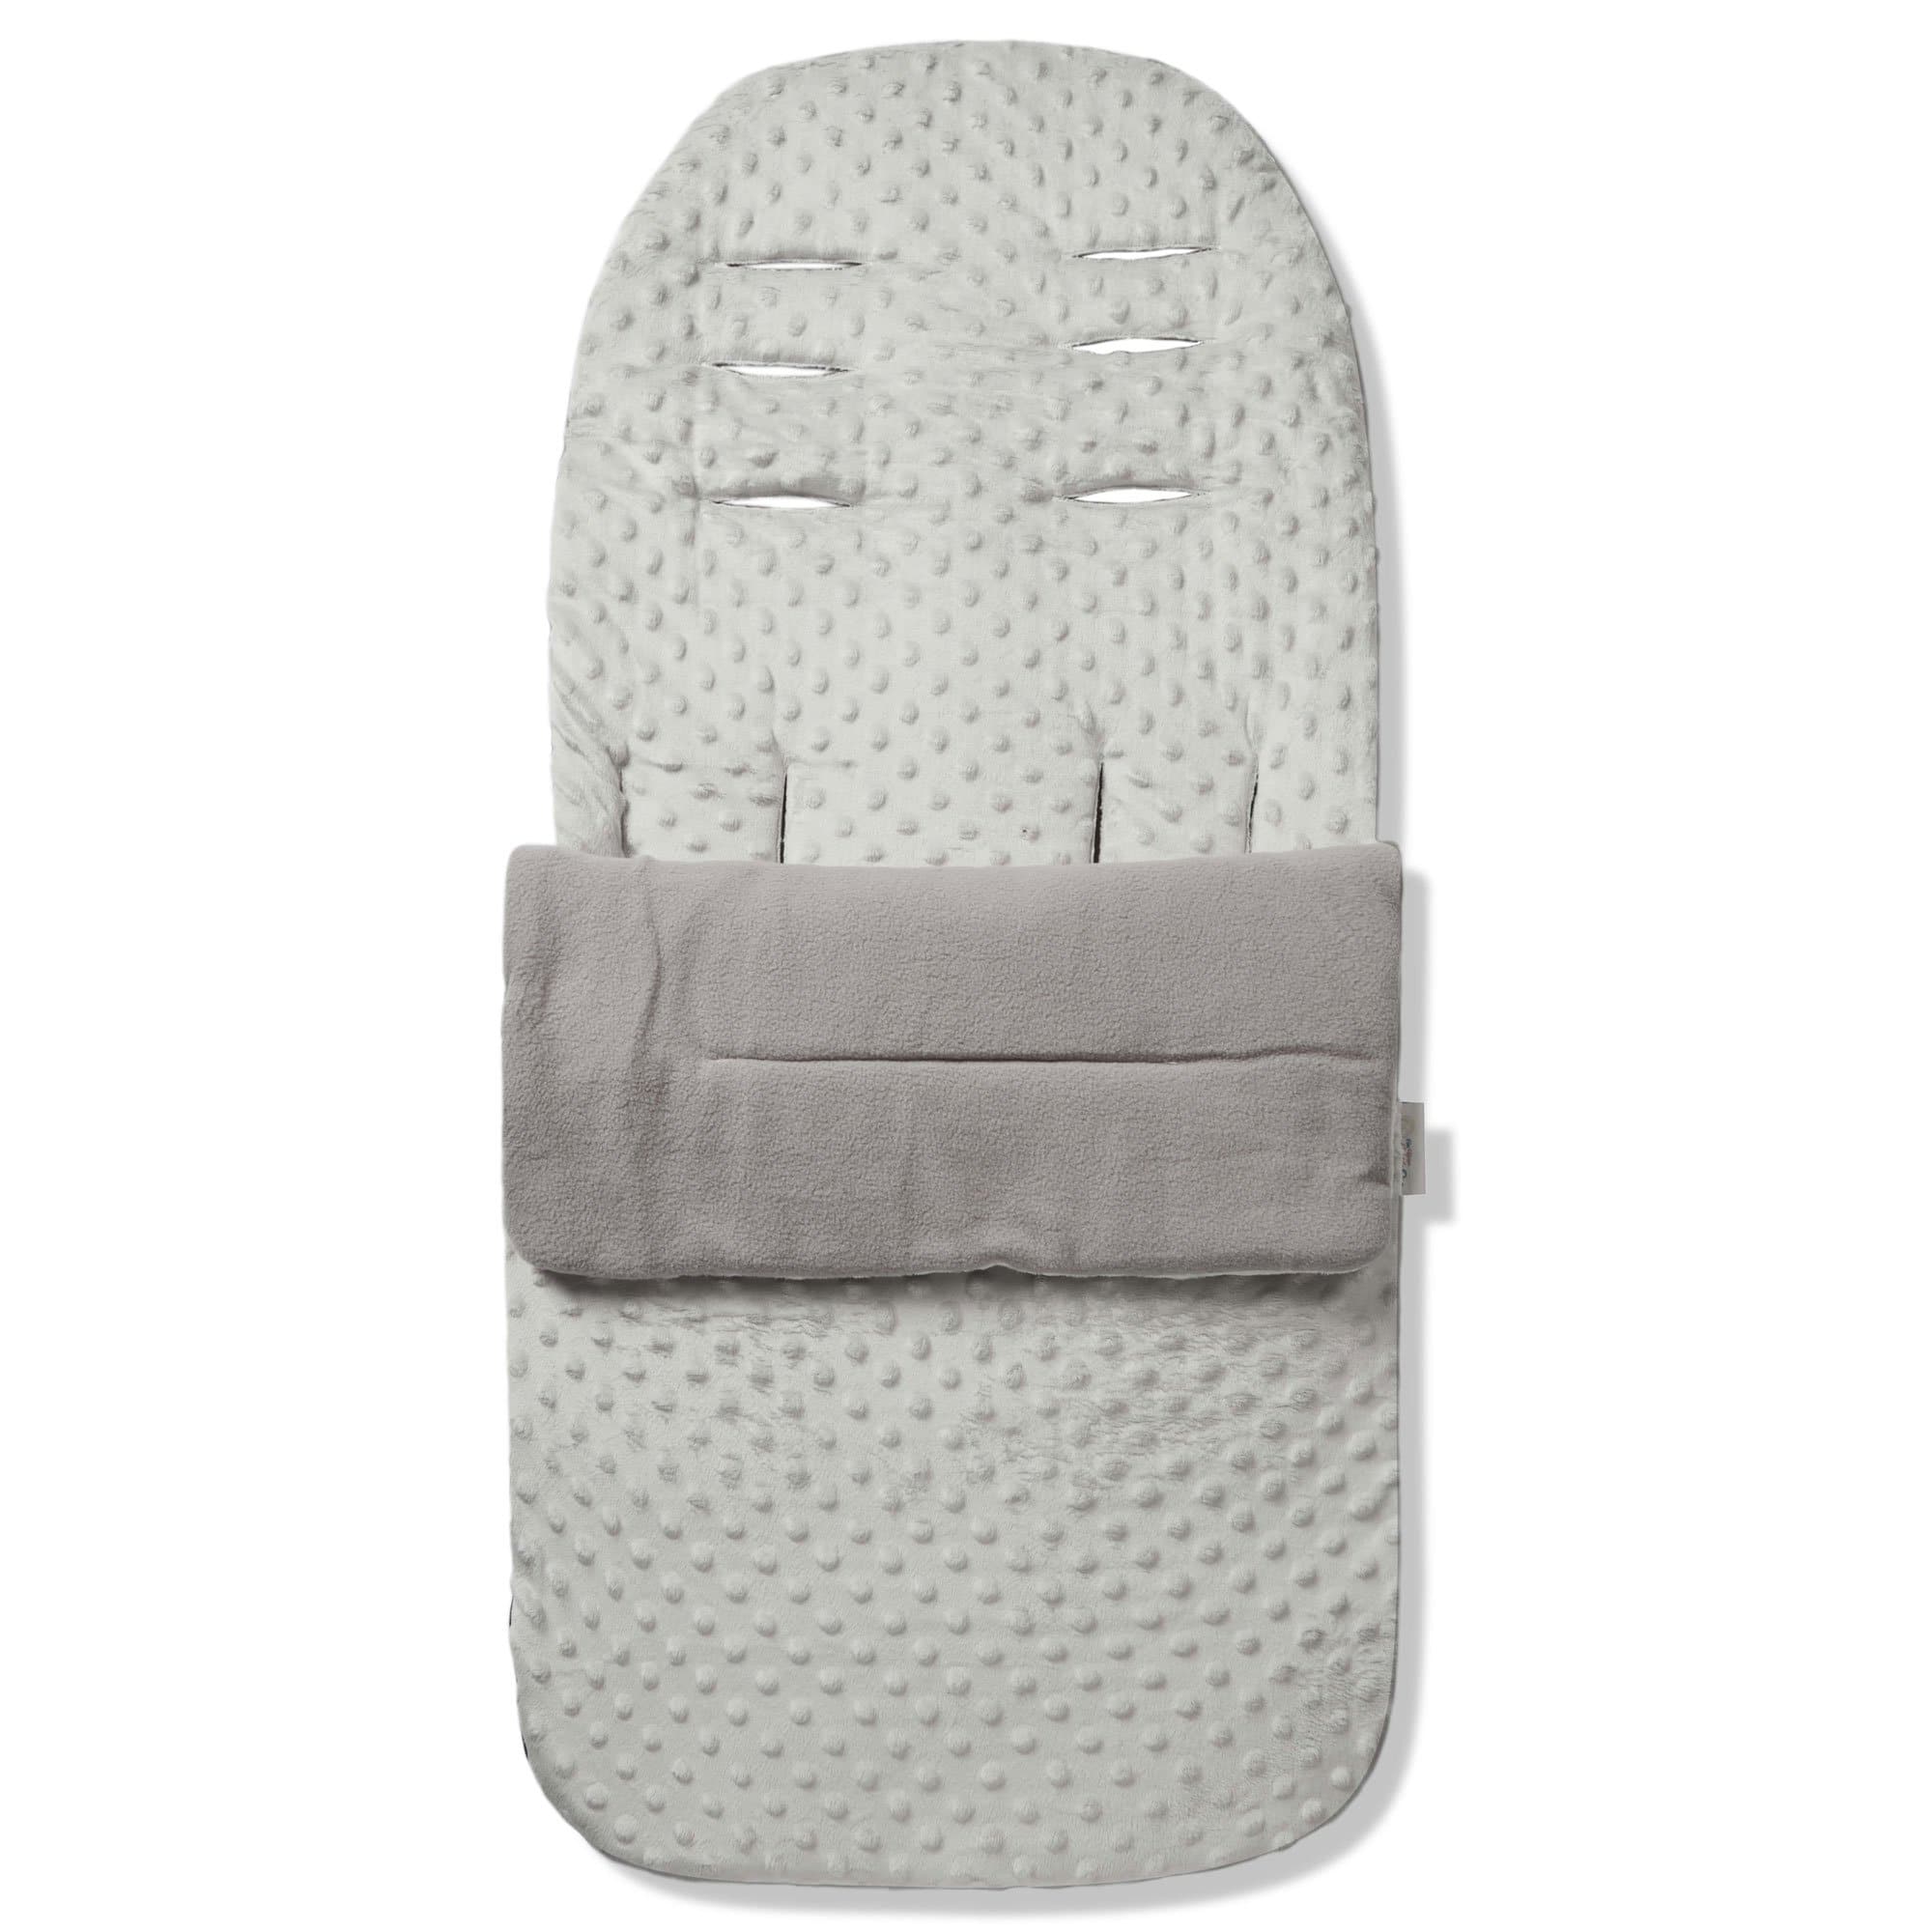 Dimple Footmuff / Cosy Toes Compatible with Excel - For Your Little One